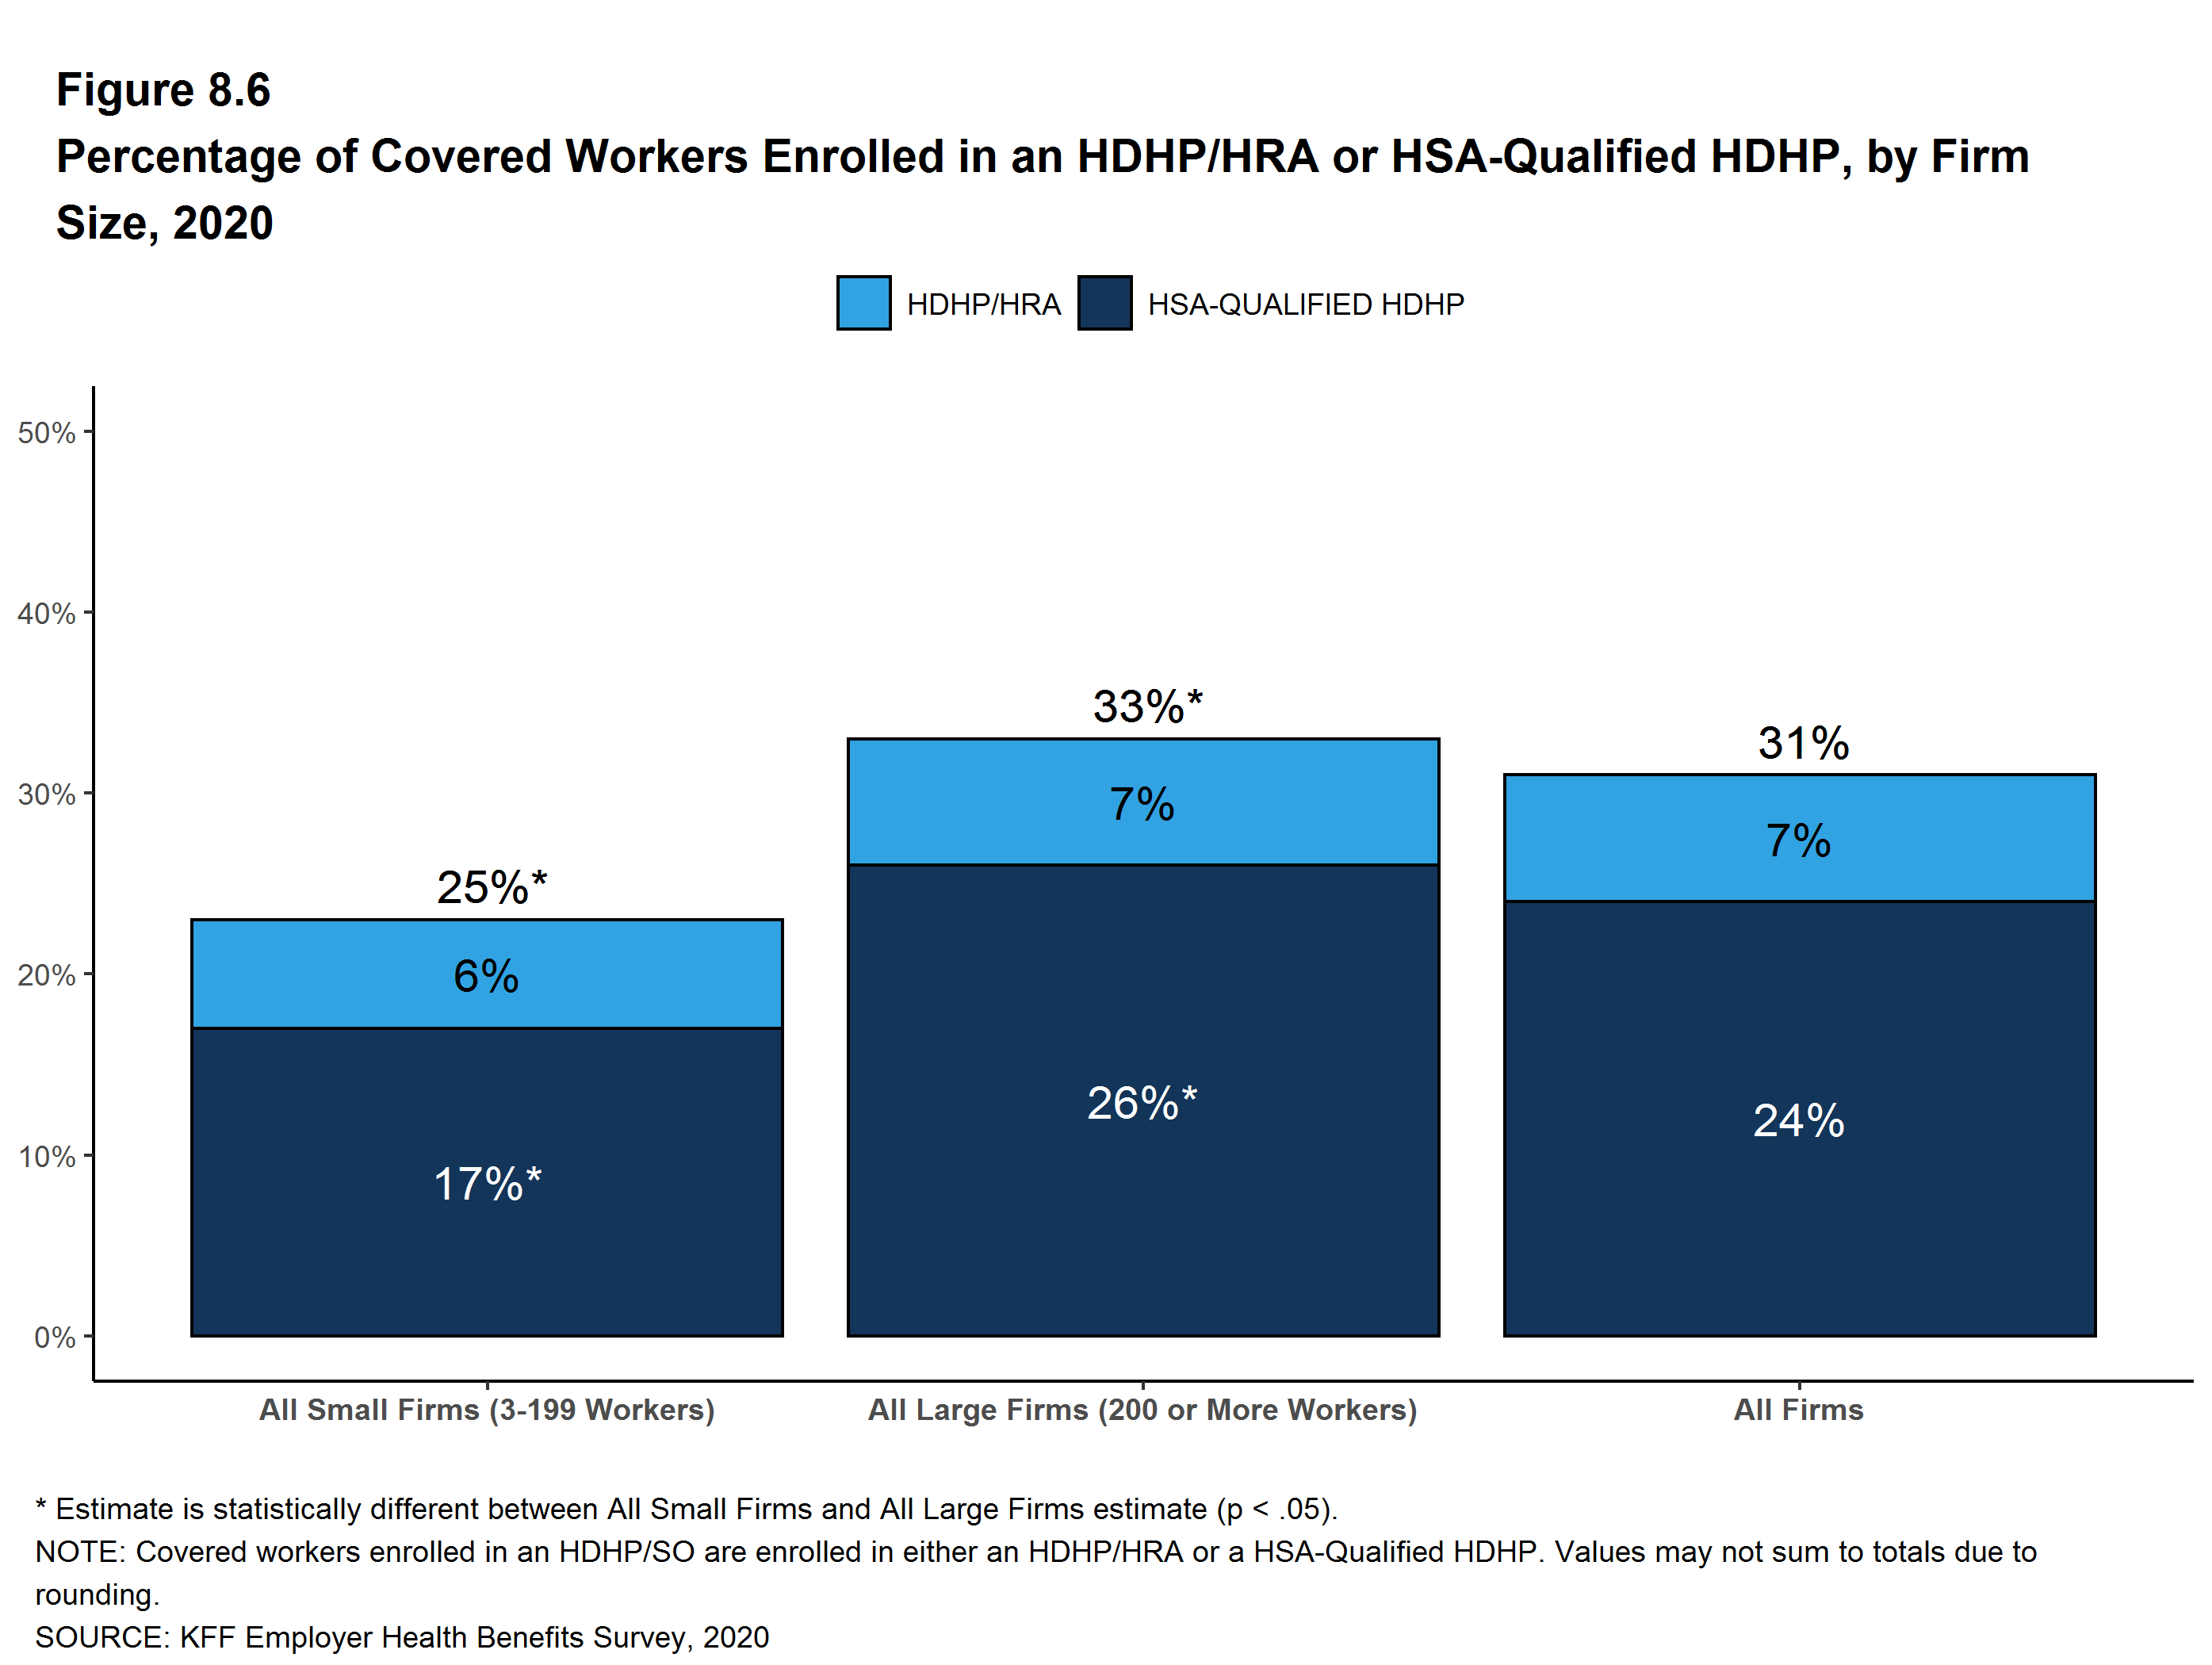 Percentage of Covered Workers Enrolled in an HDHP/HRA or HSAQualified